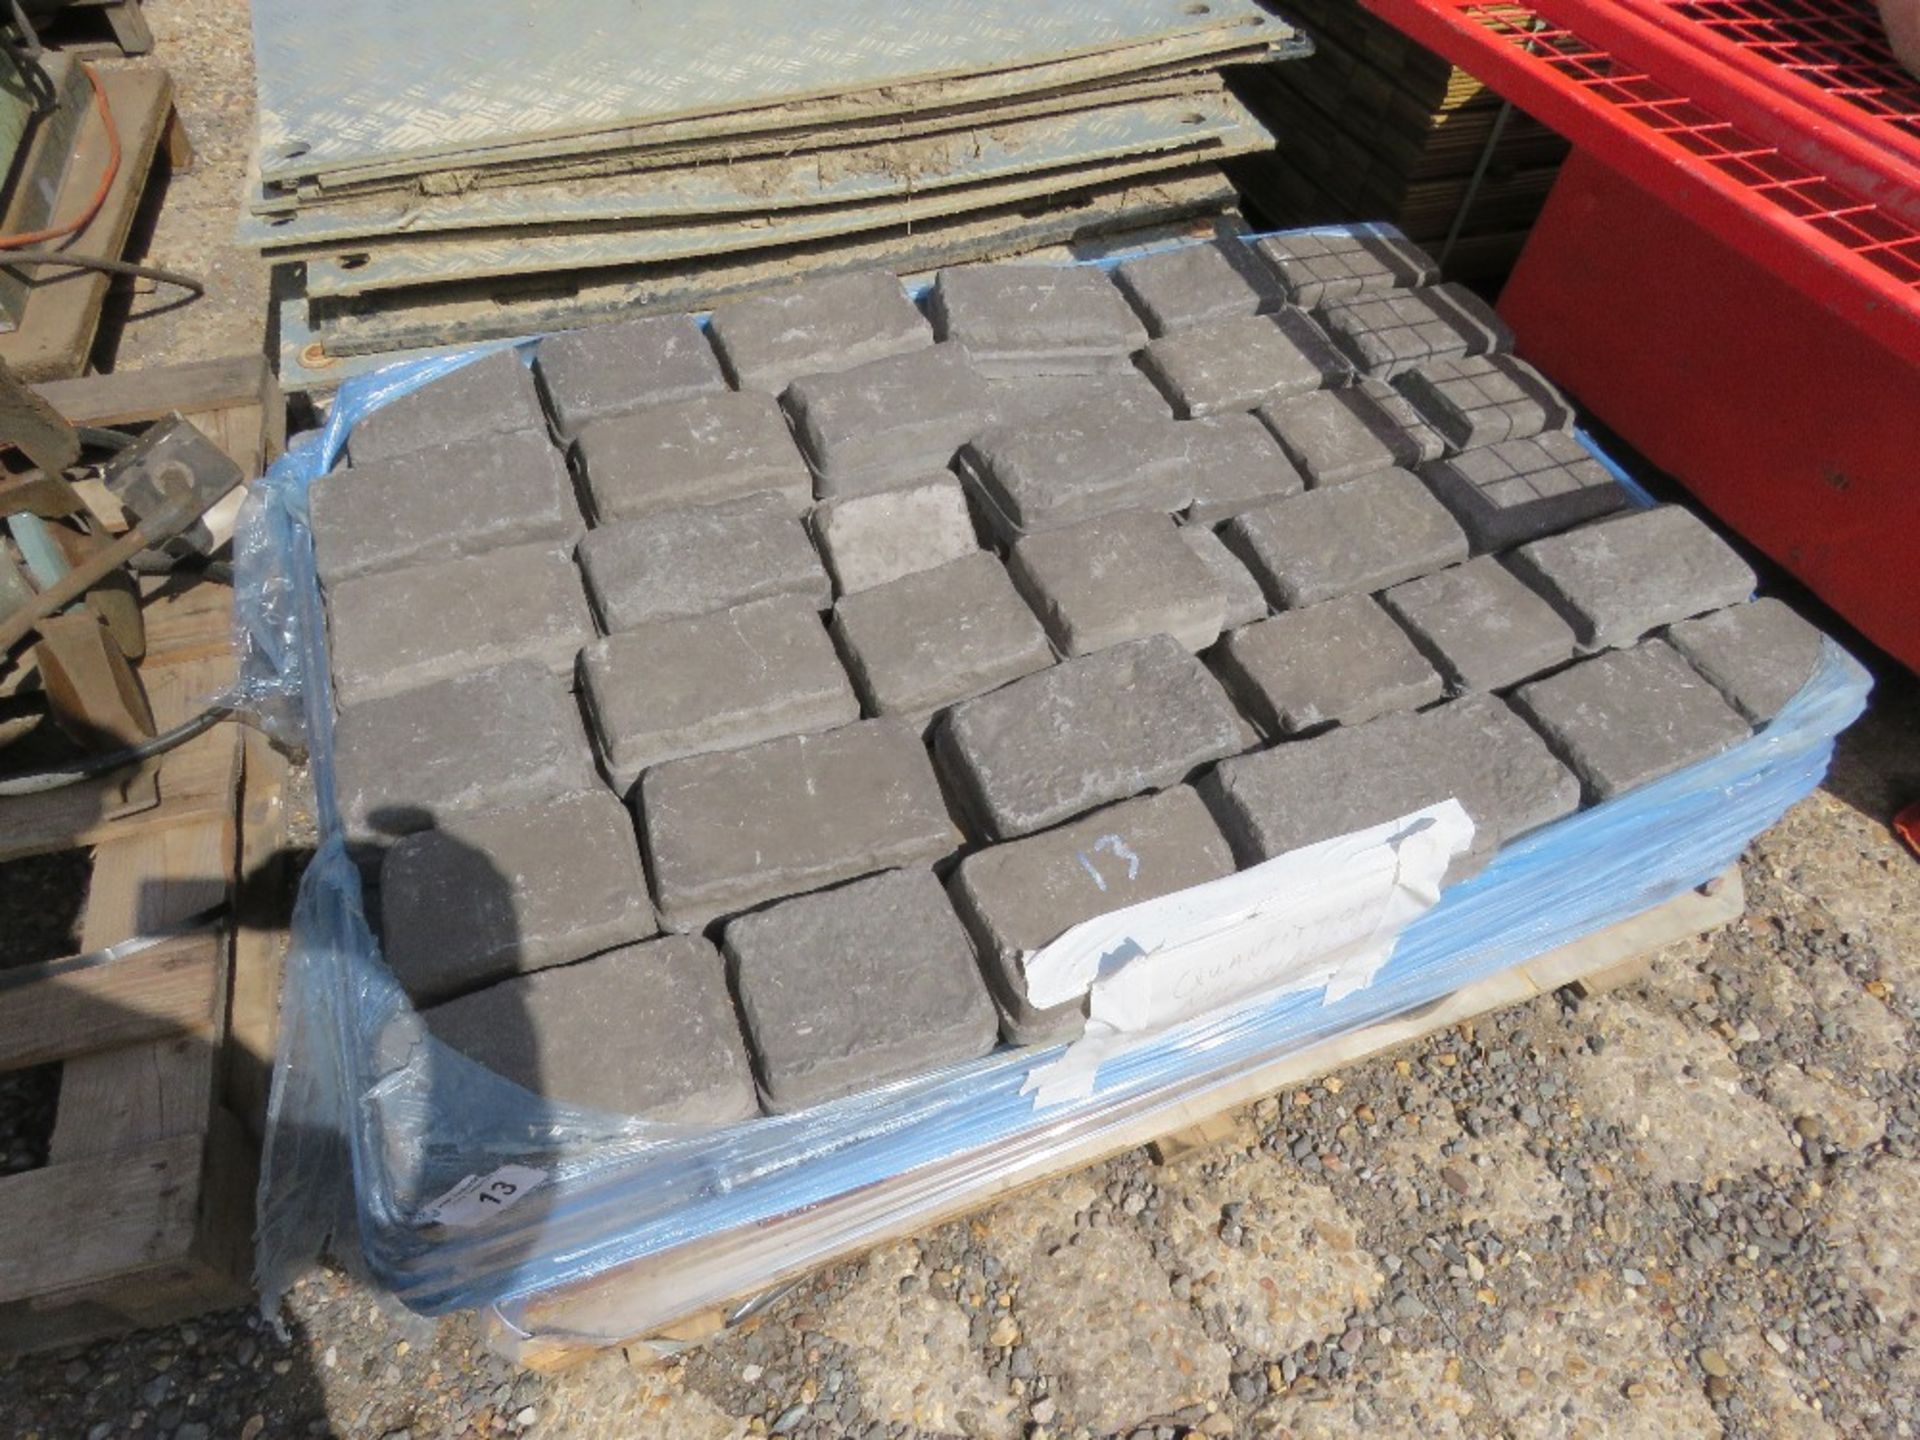 PALLET OF MARSHALLS DECORATIVE COBBLE EFFECT BLOCK PAVERS. THIS LOT IS SOLD UNDER THE AUCTIONEERS